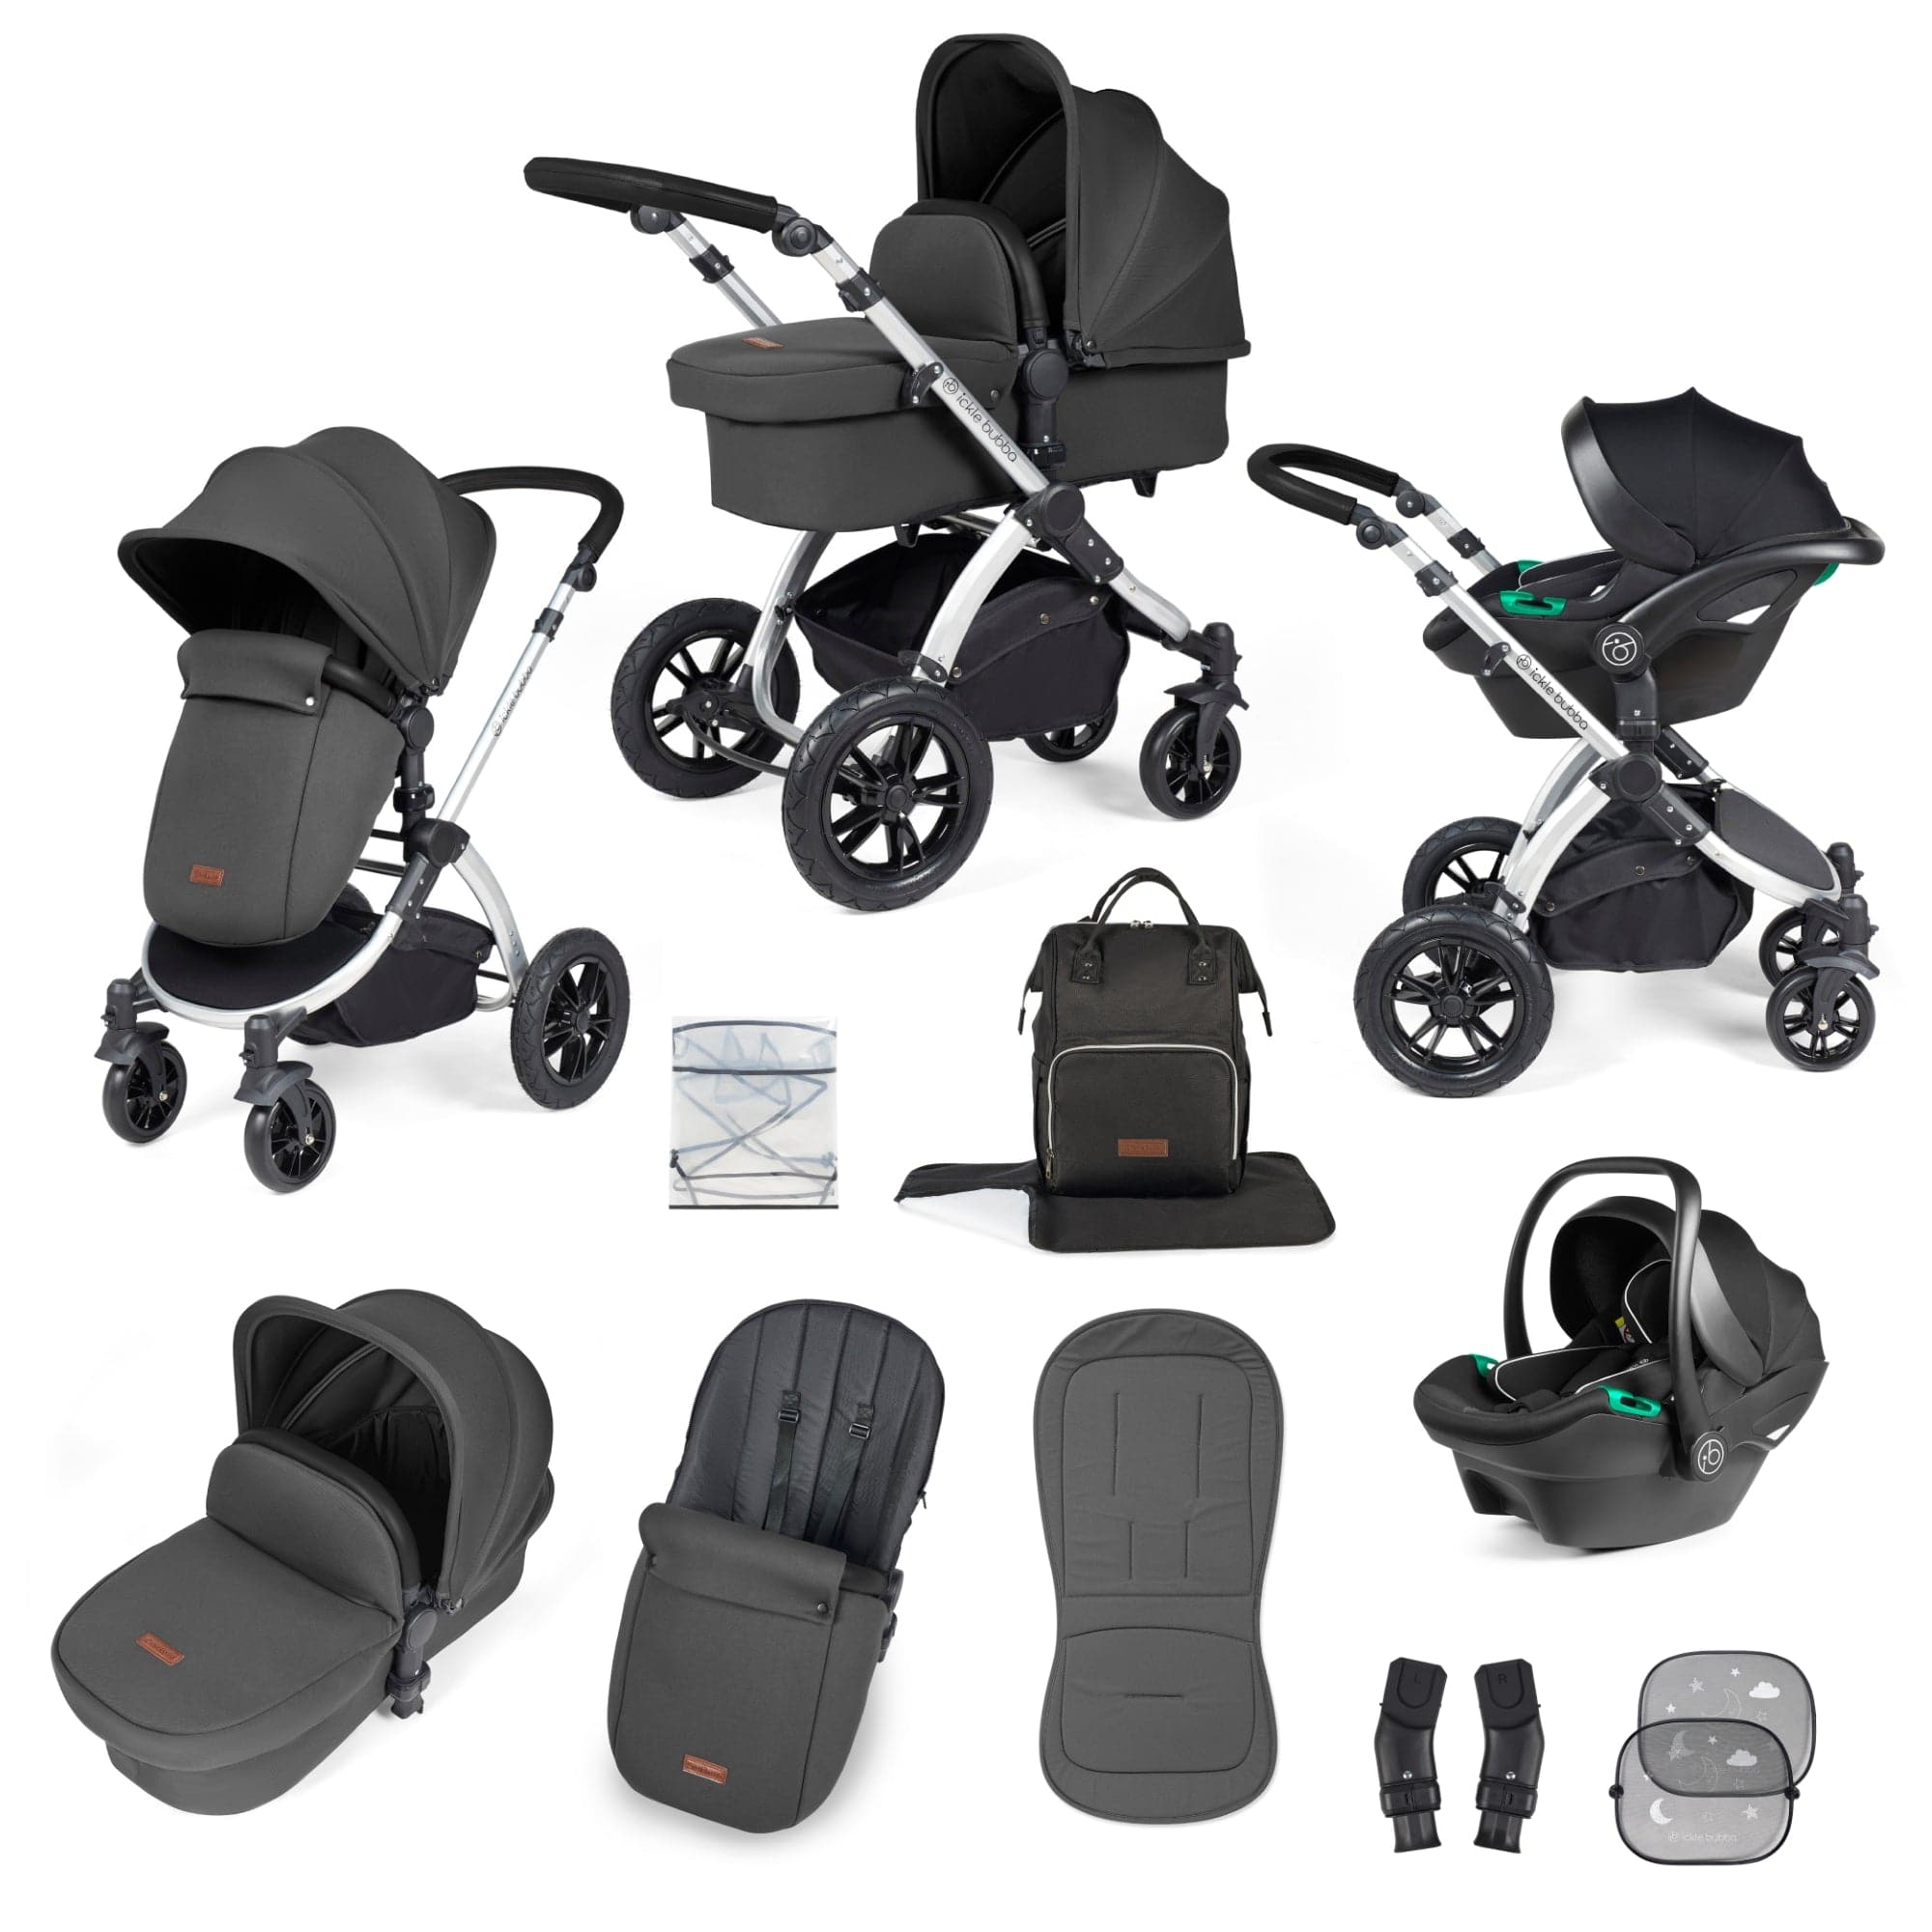 Ickle Bubba Stomp Luxe All-In-One I-Size Travel System With Isofix Base - Silver / Charcoal Grey / Black   